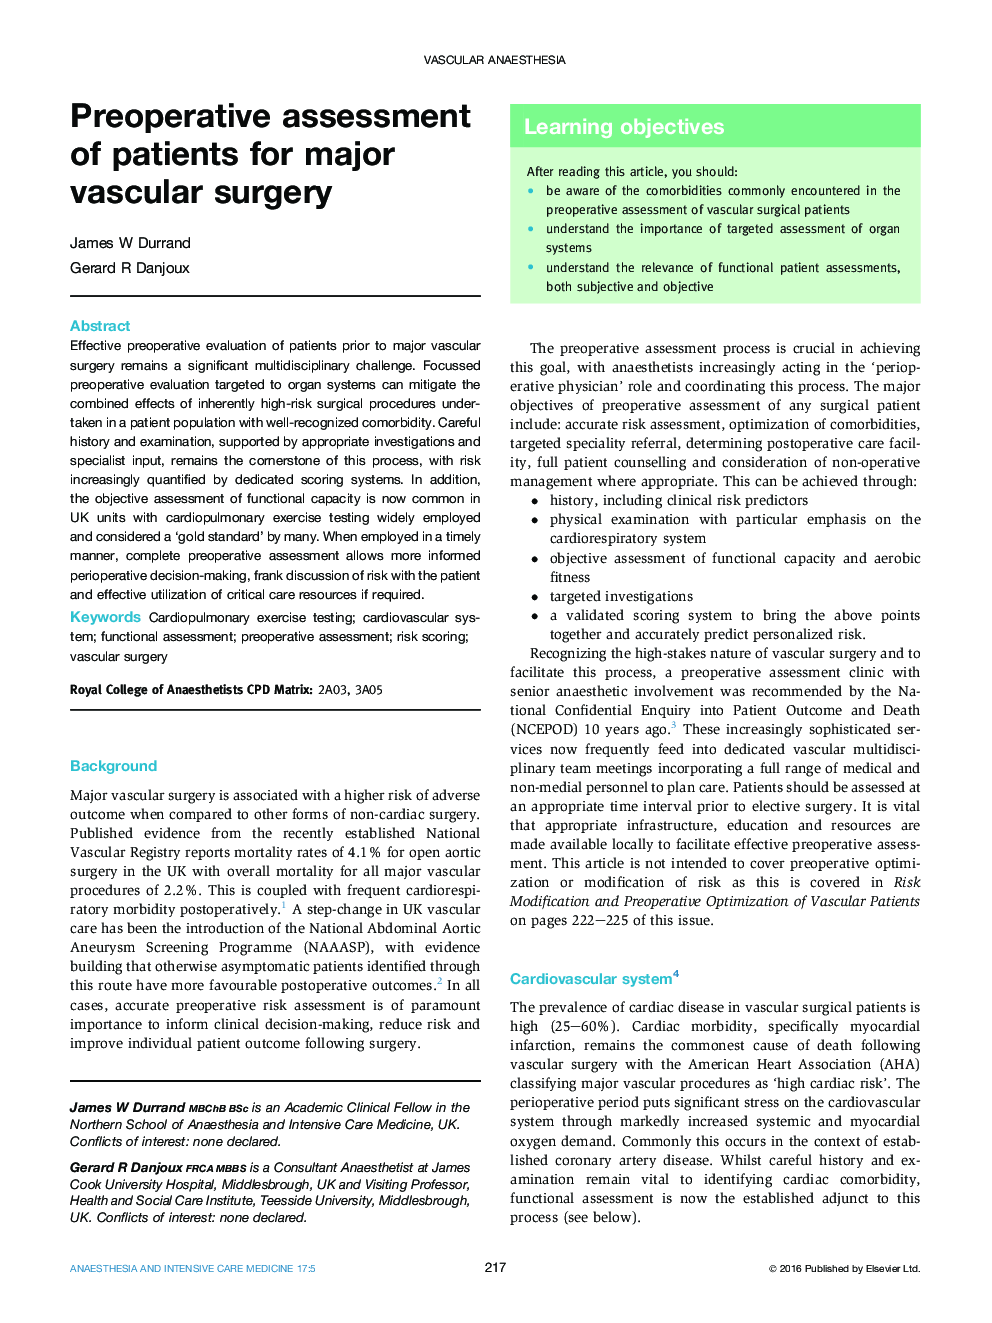 Preoperative assessment of patients for major vascular surgery